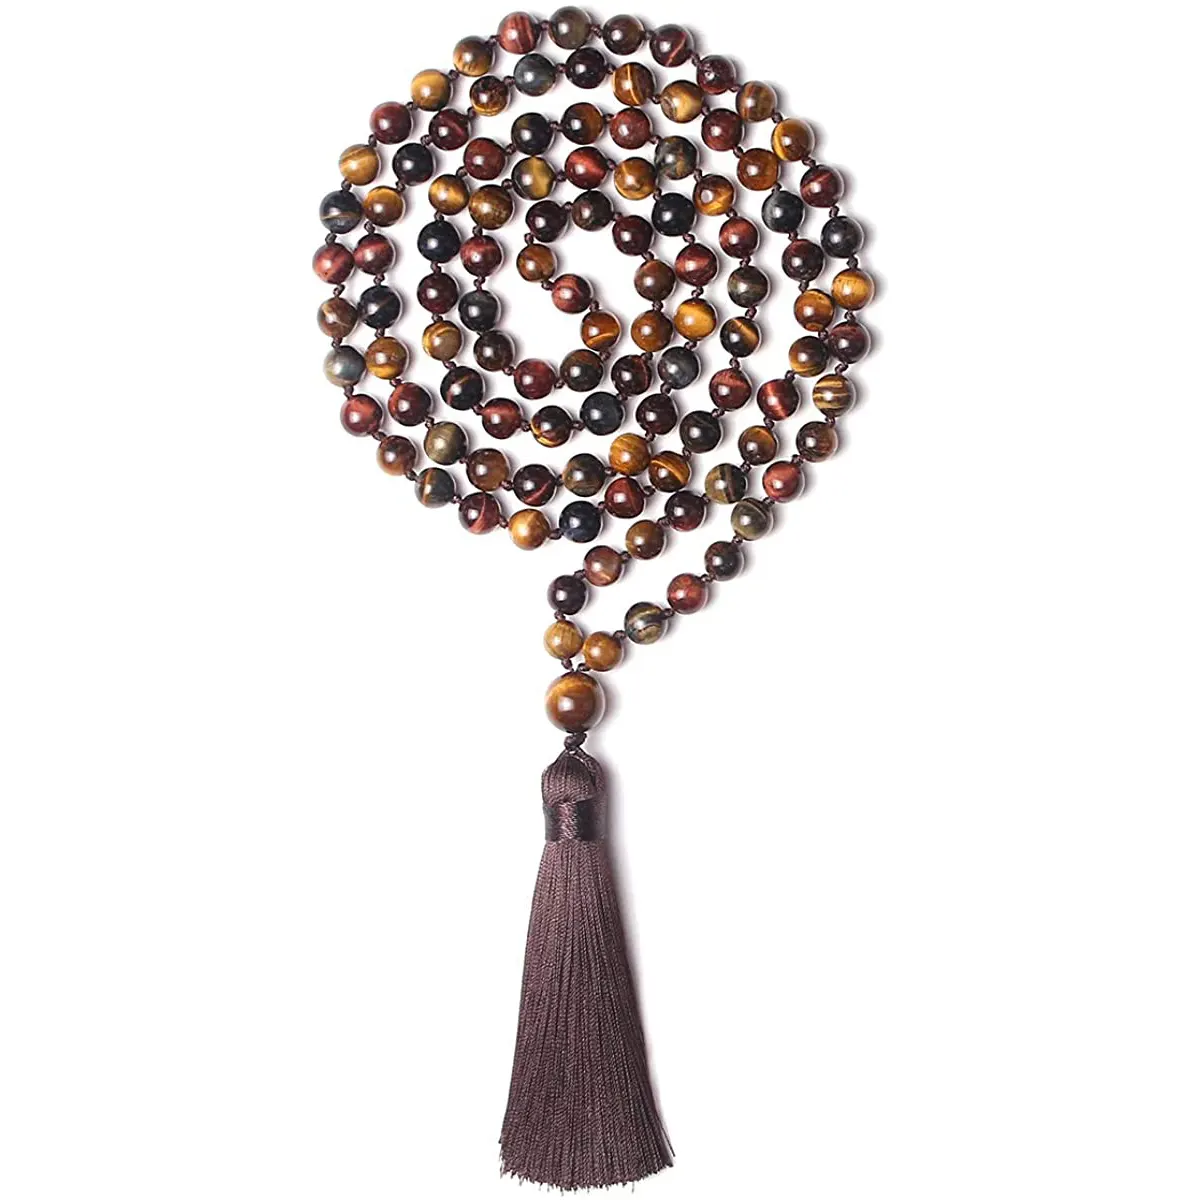 108 Mala Beads Necklace 8mm Natural Stone Prayer Beads Yoga Meditation Beads Hand Knotted Tassel Necklace